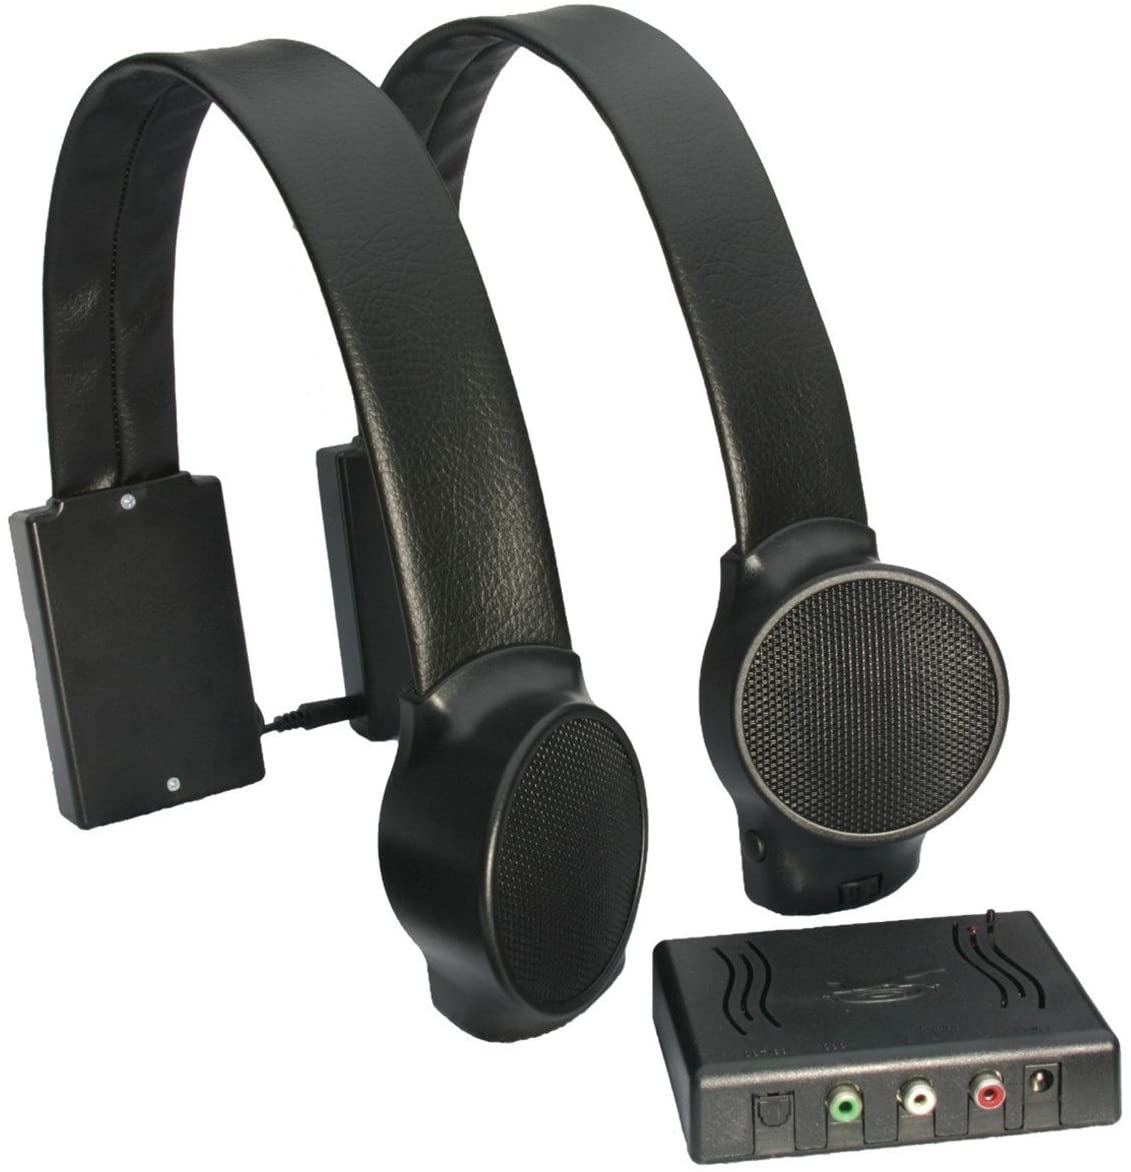 ADF, Audio Fox ADF AF-0004DS,  Wireless Speakers, Over the chair speaker system, dual headset, single transmitter, black